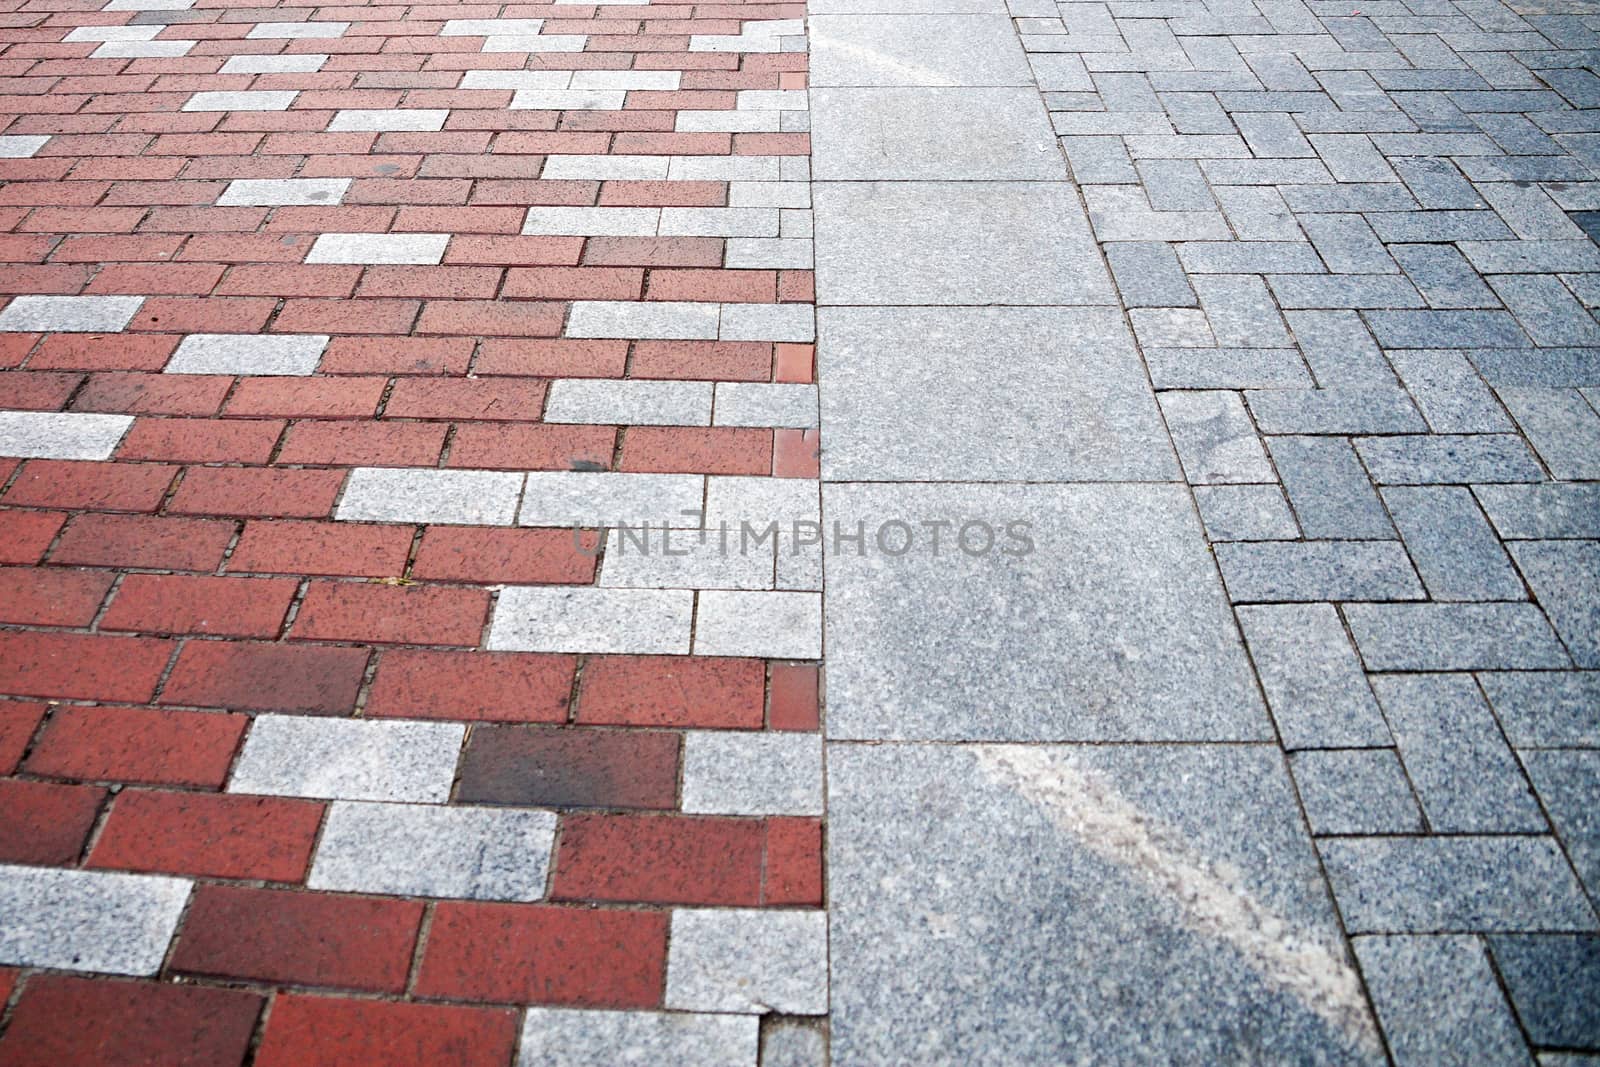 red and gray paving slabs in perspective.